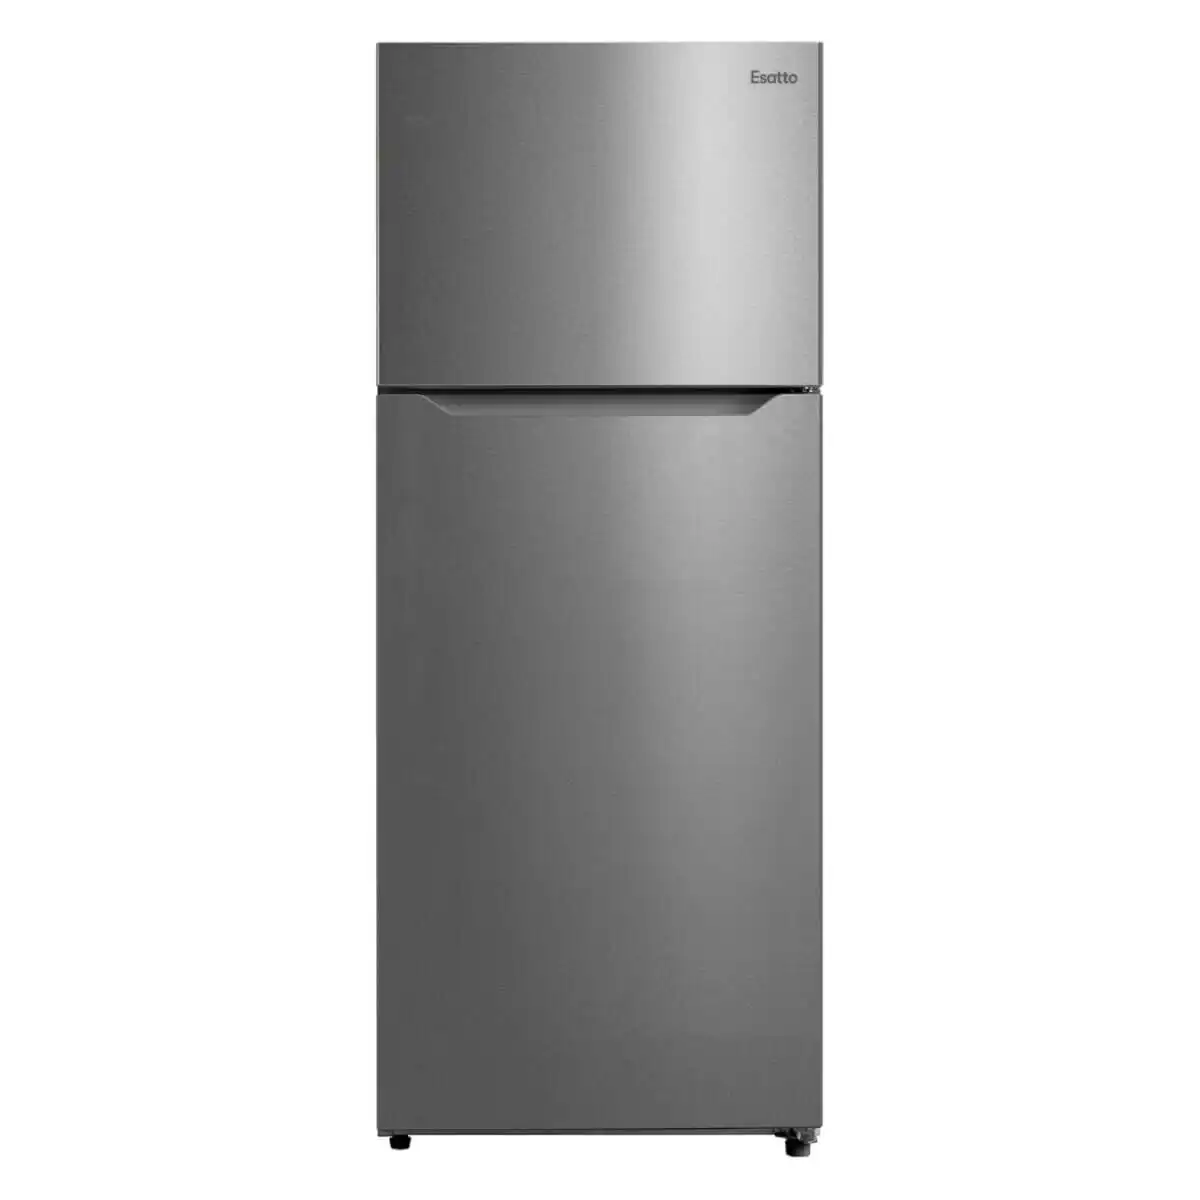 Esatto 413L Top Mount Frost Free Fridge Stainless Steel